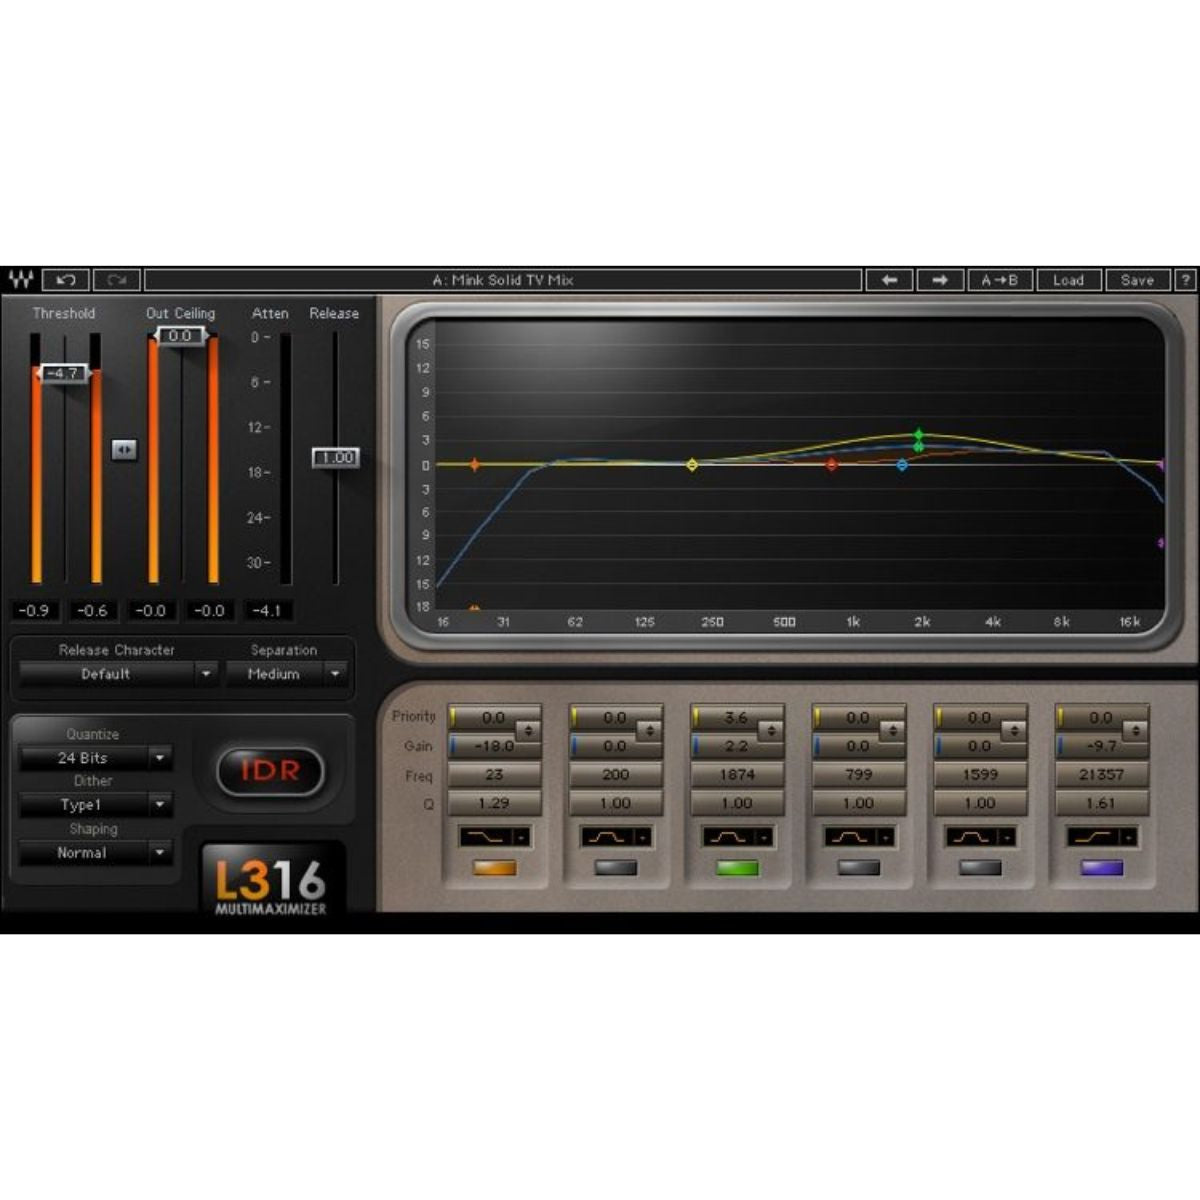 Waves L3-16 Multimaximizer Plug-in